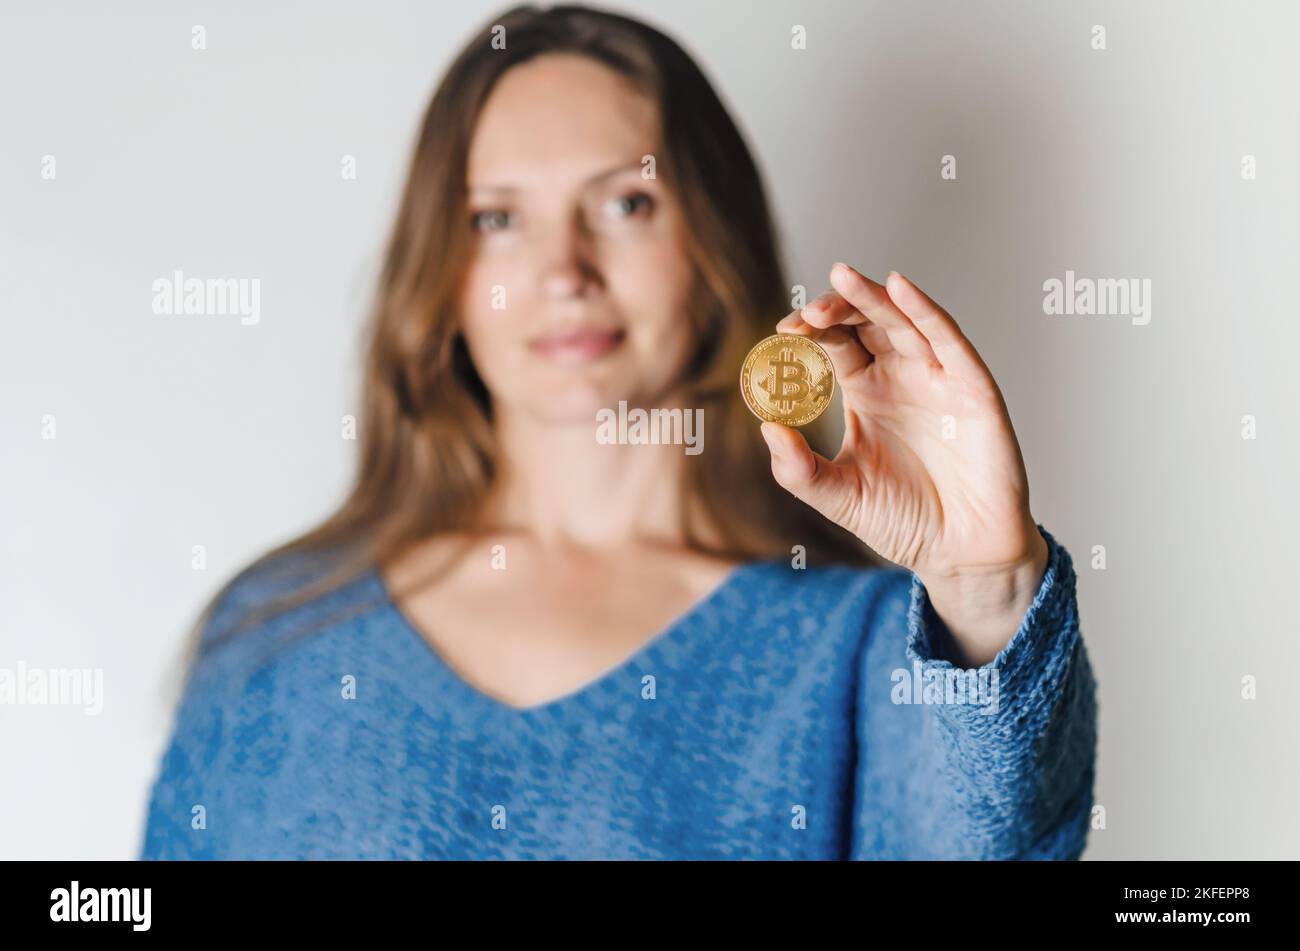 Joyful woman standing holding bitcoin paying attention to new digital cryptocurrency wearing blue sweater. Indoor studio shot isolated on white backgr Stock Photo